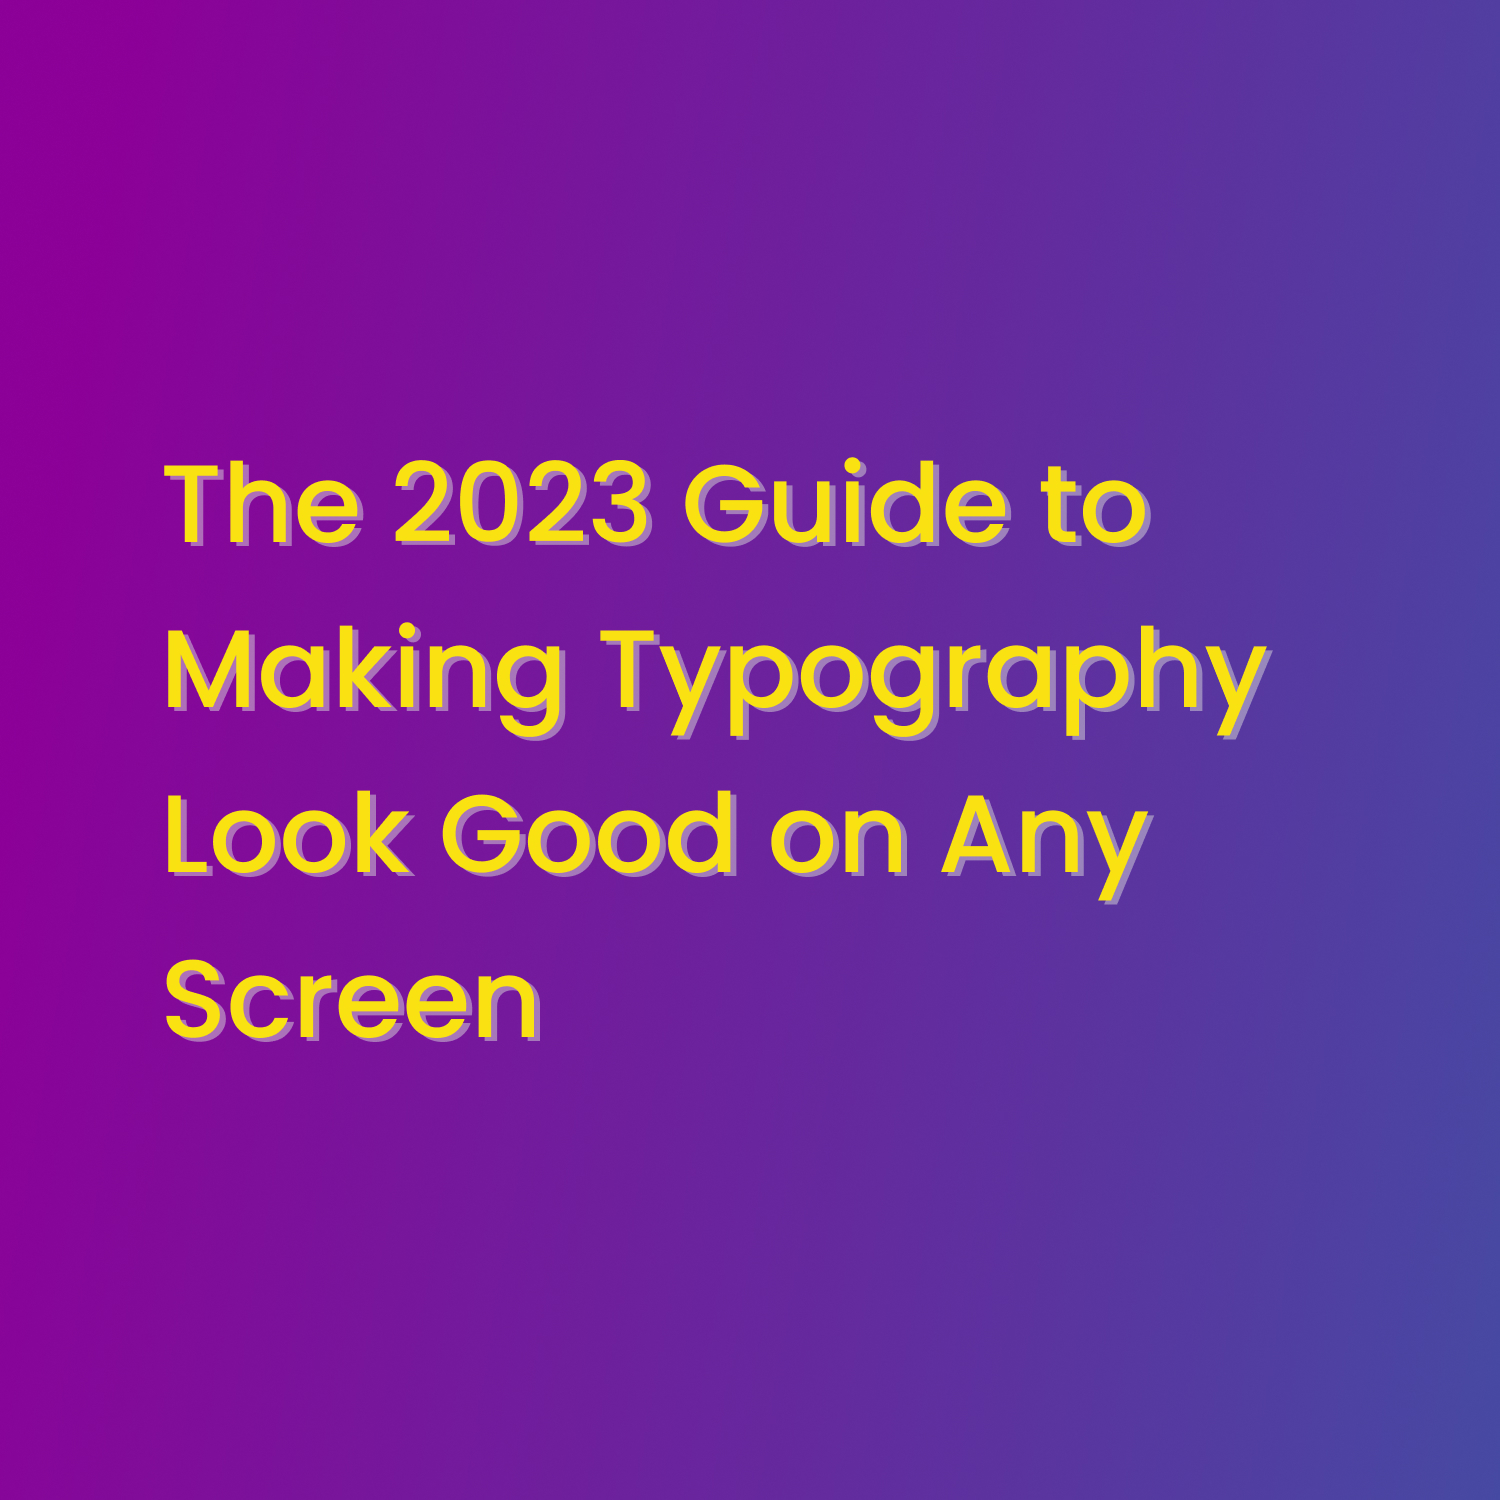 The 2023 Guide to Making Typography Look Good on Any Screen